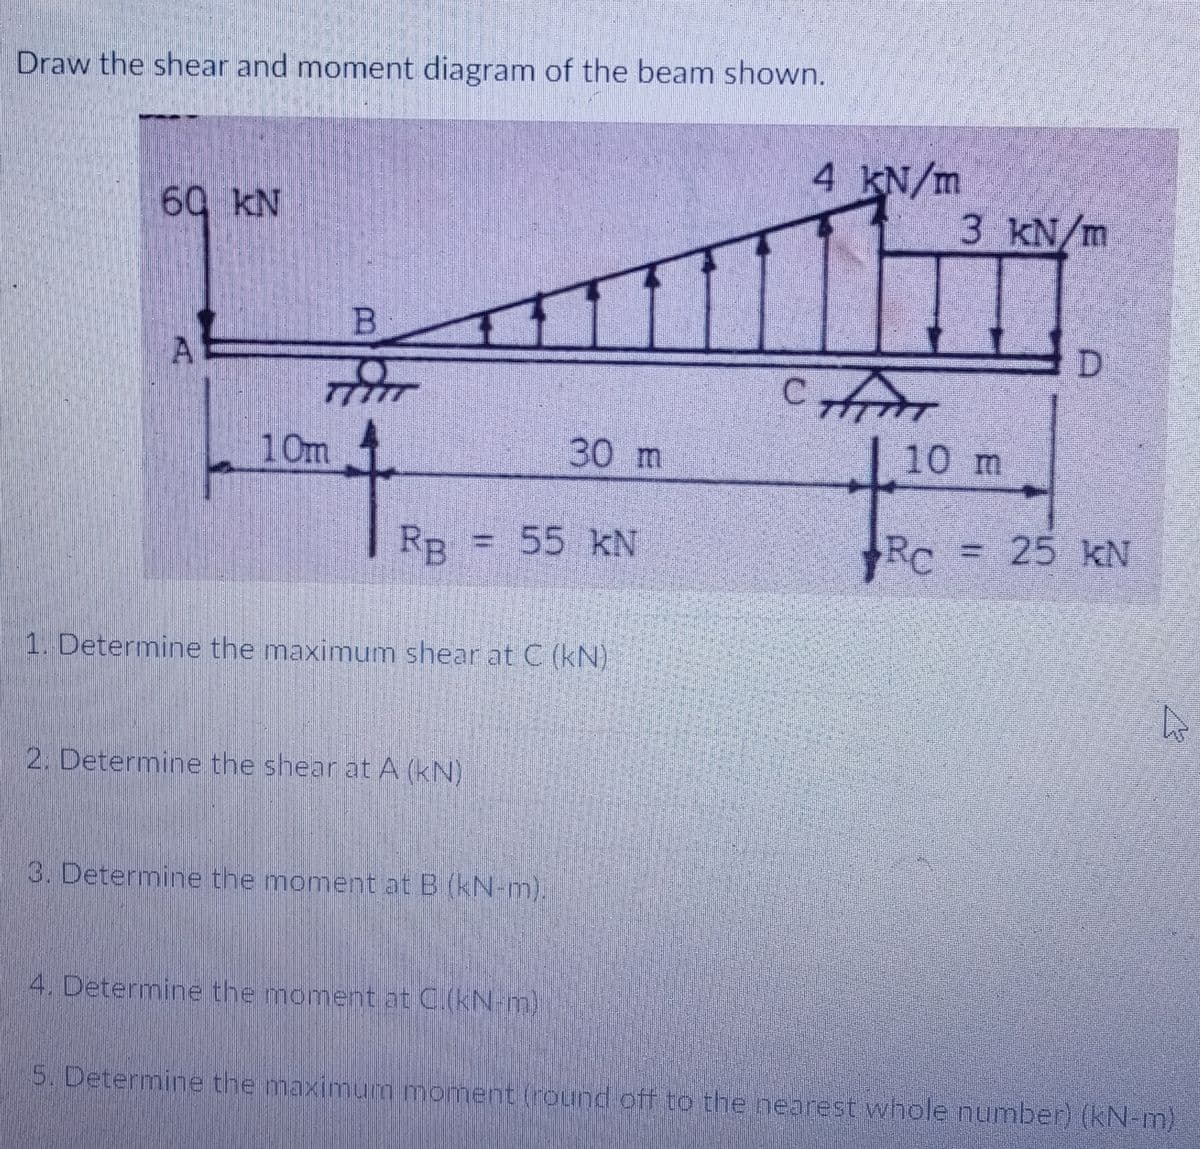 Draw the shear and moment diagram of the beam shown.
4 KN/m
60 kN
3 kN/m
В
D
77777
10m
30 m
10 m
RB = 55 kN
Rc = 25 kN
1. Determine the maximum shear at C (kN)
2. Determine the shear at A (kN)
3. Determine the moment at B (kN-m),
4. Determine the moment at C.(kN-m)
5. Determine the maximum moment (round off to the nearest whole number) (kN-m)
